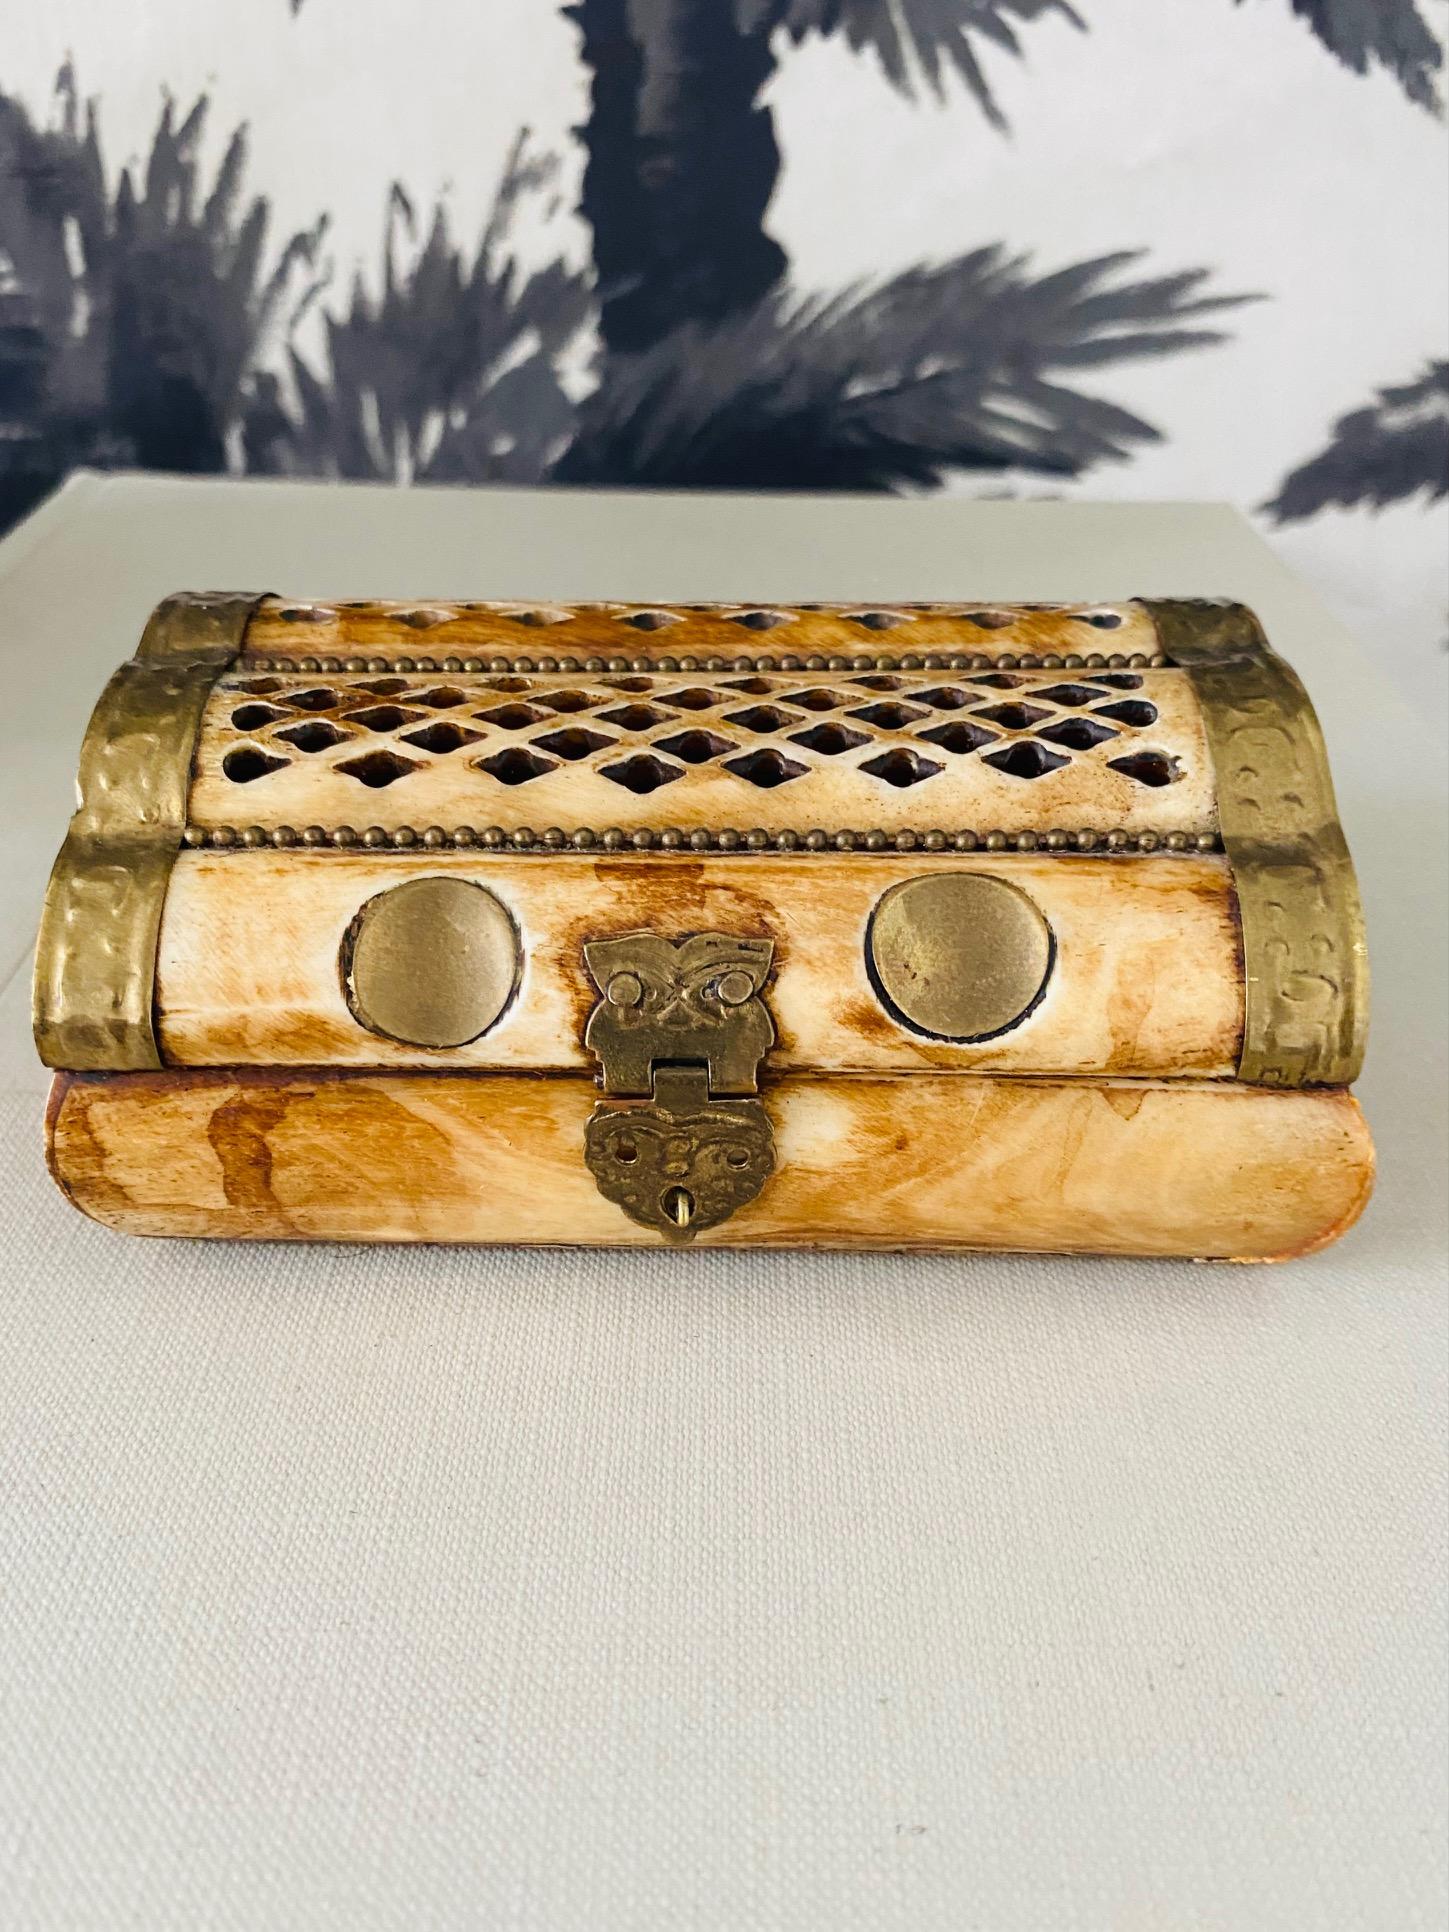 Exotic handcrafted trinket box made of bone with hammered brass accents. The top of the box features Moorish style piercings, circular brass insets, and brass chain beading along the rows of bone. Fitted with brass decorative latch and hinges and